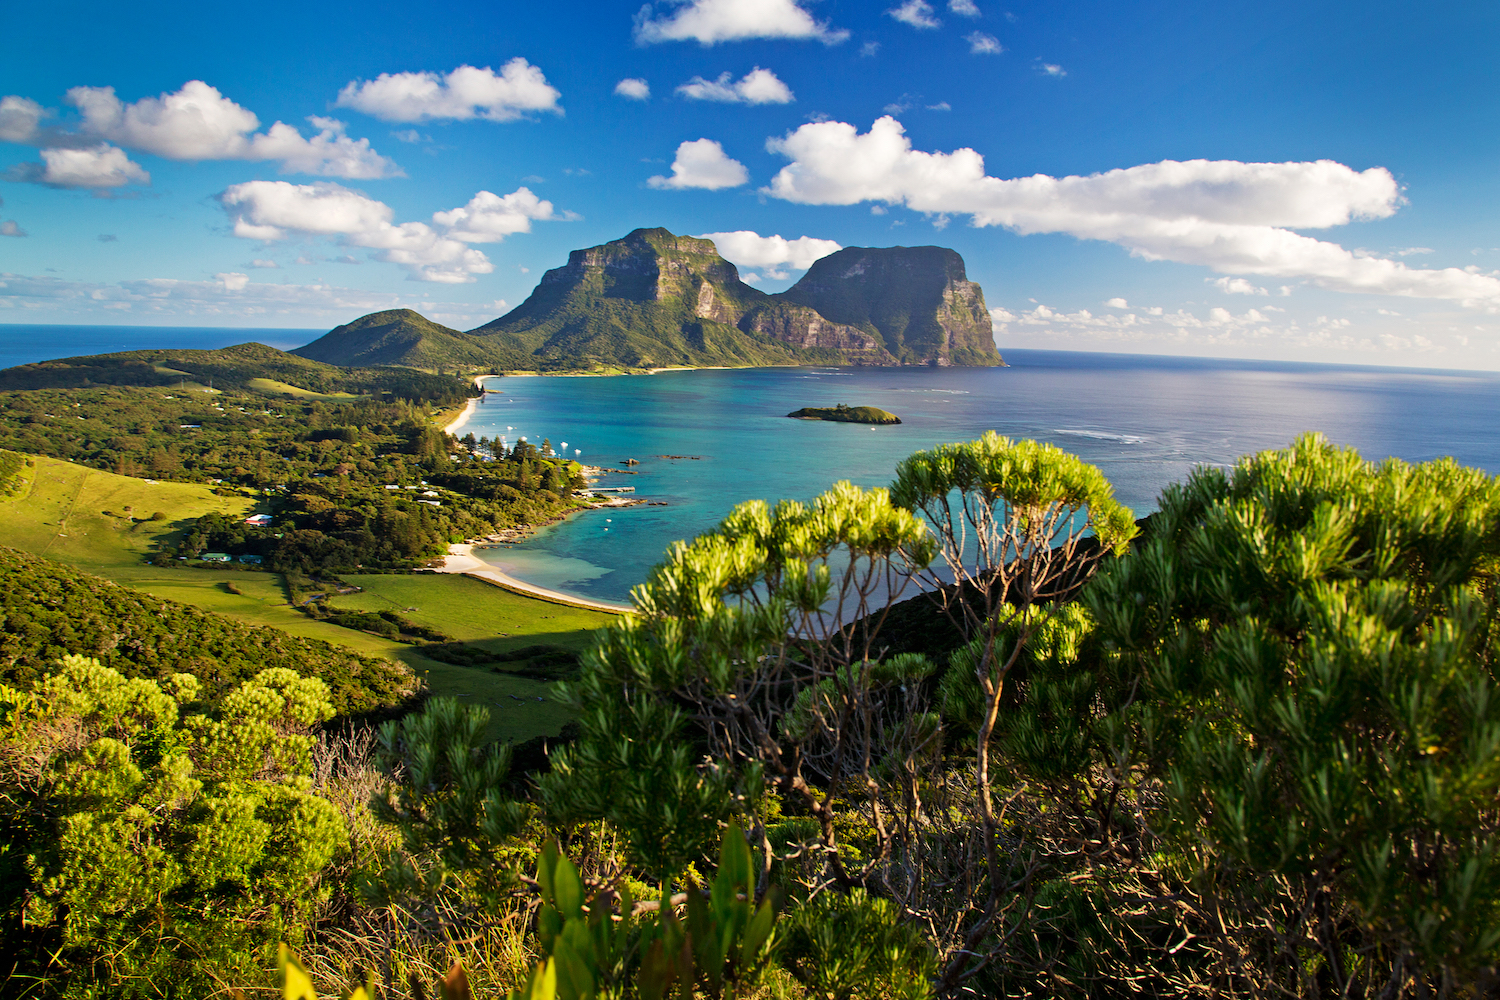 Capella is situated on Lord Howe Island - one of Australia's most beautiful destinations